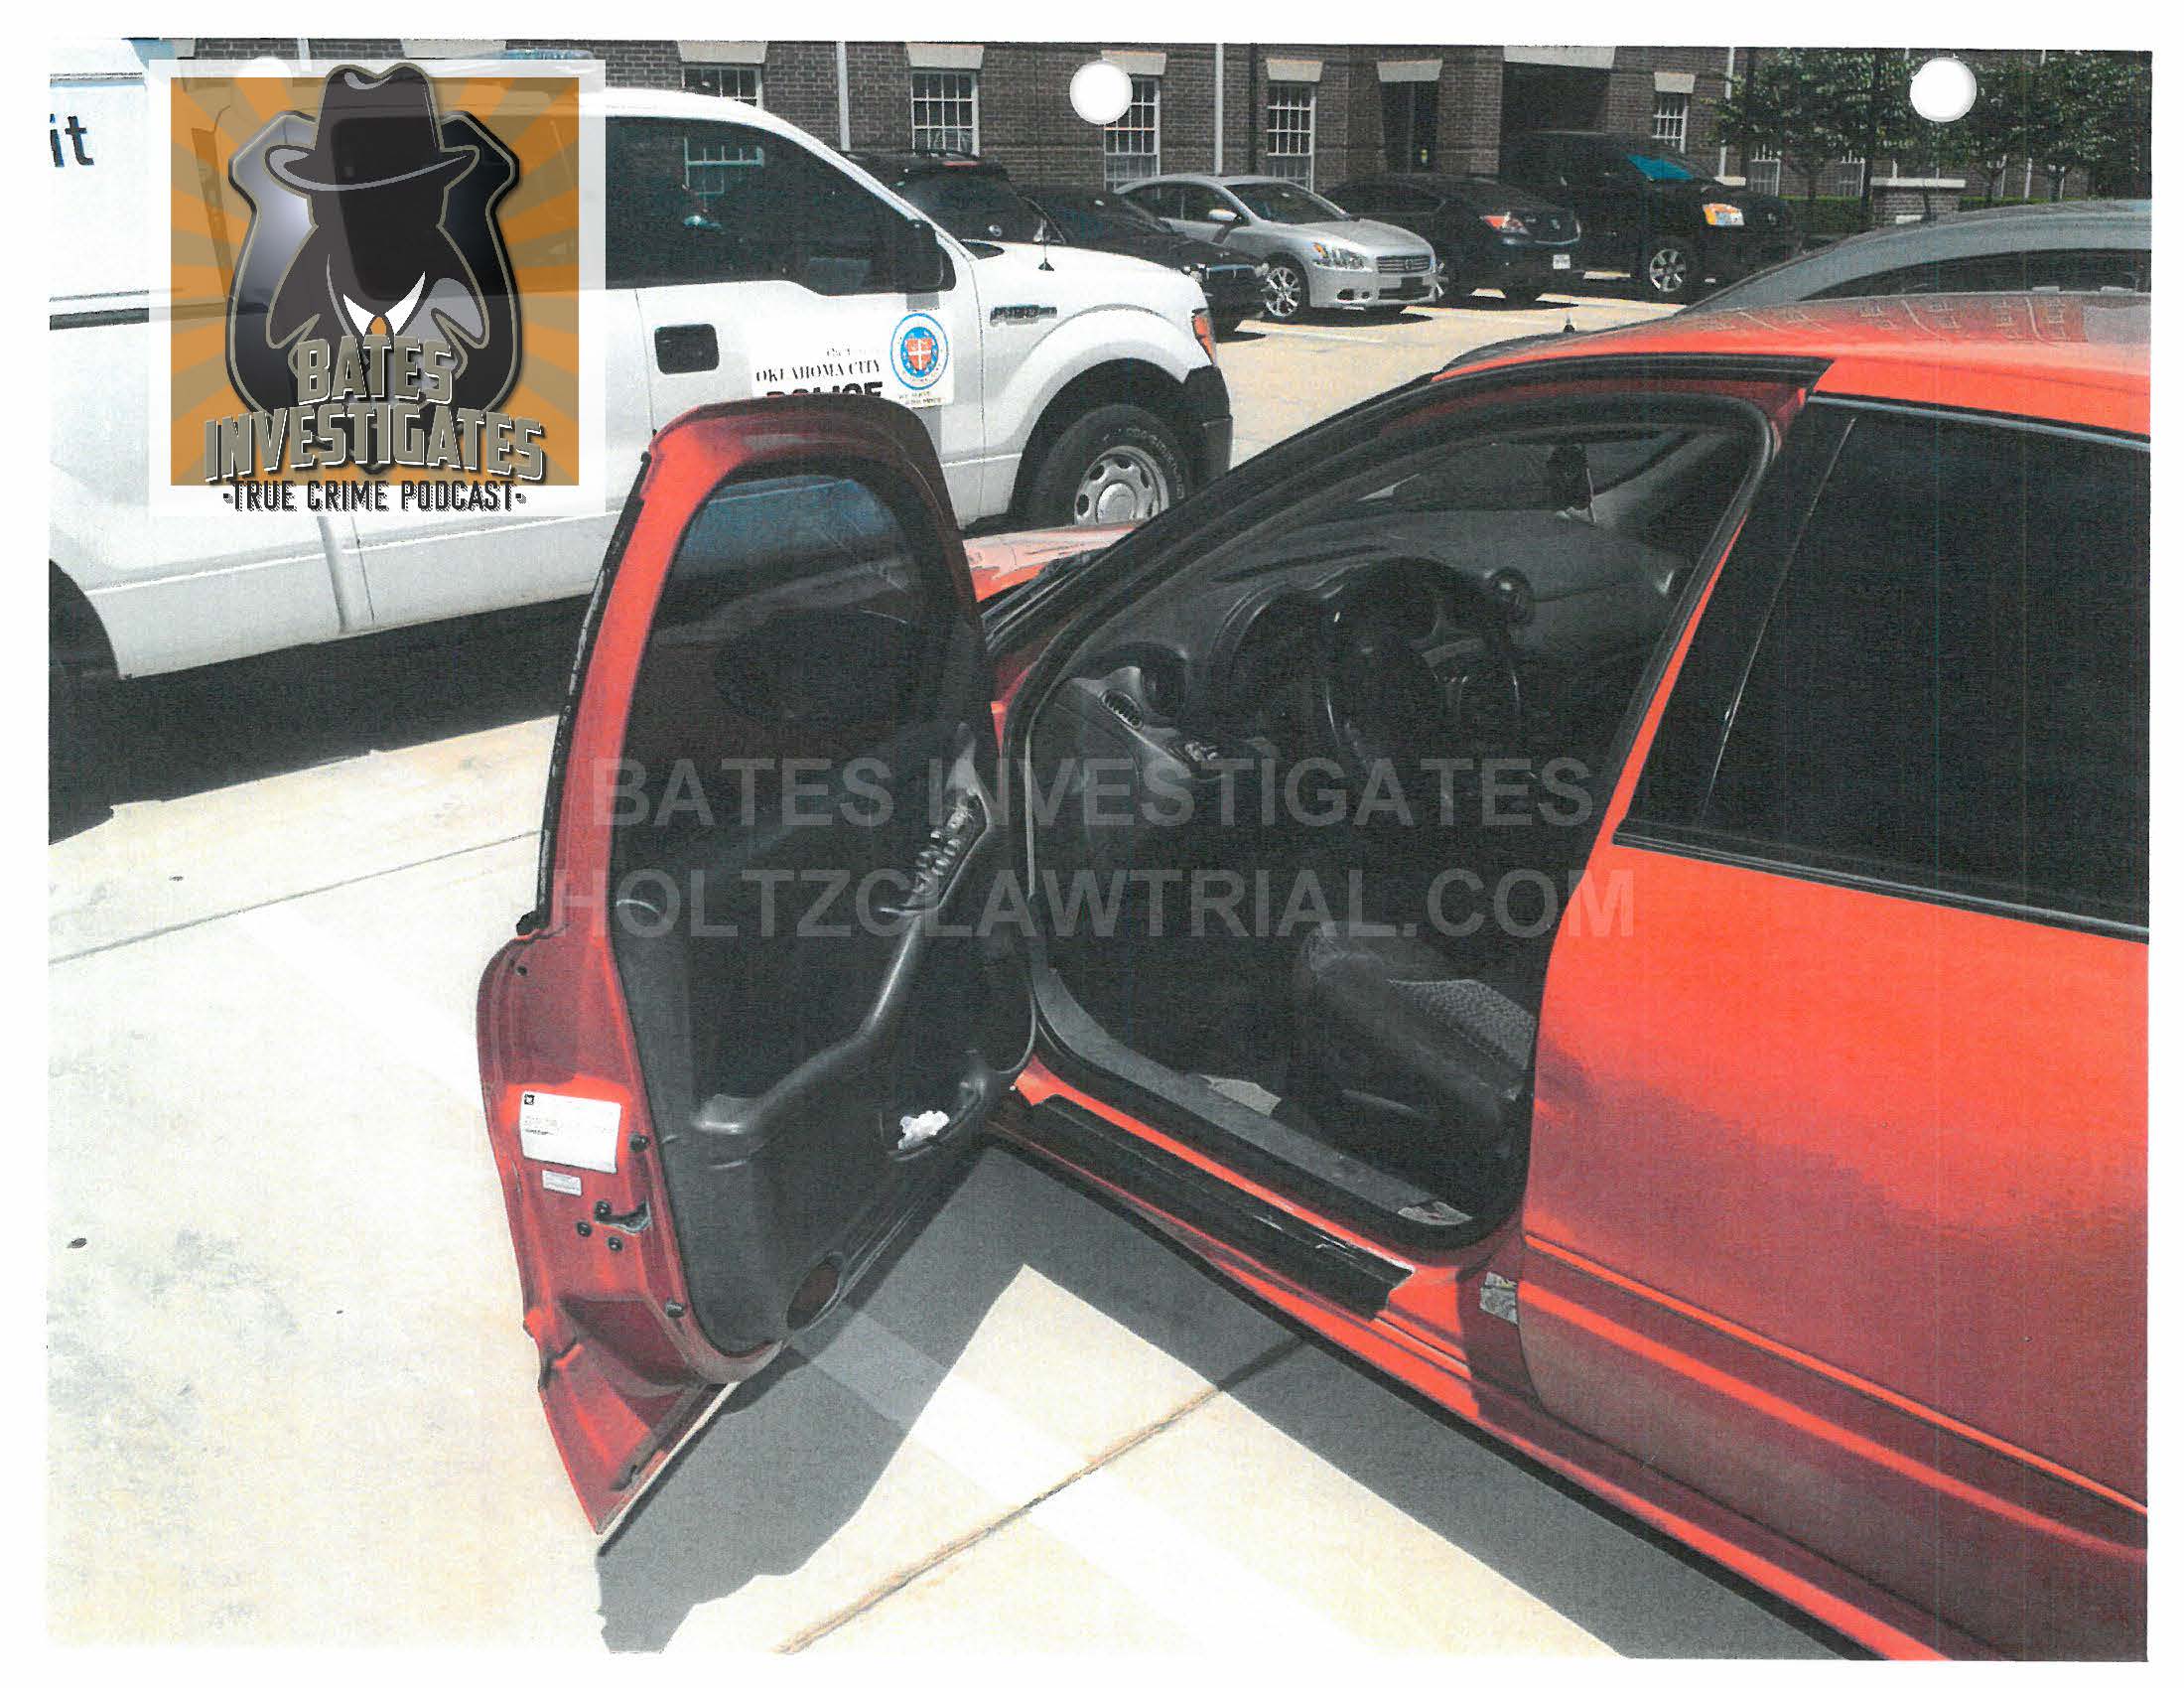 Holtzclaw Podcast Ep02 - Ligons Car - Watermarked_Page_06.jpg